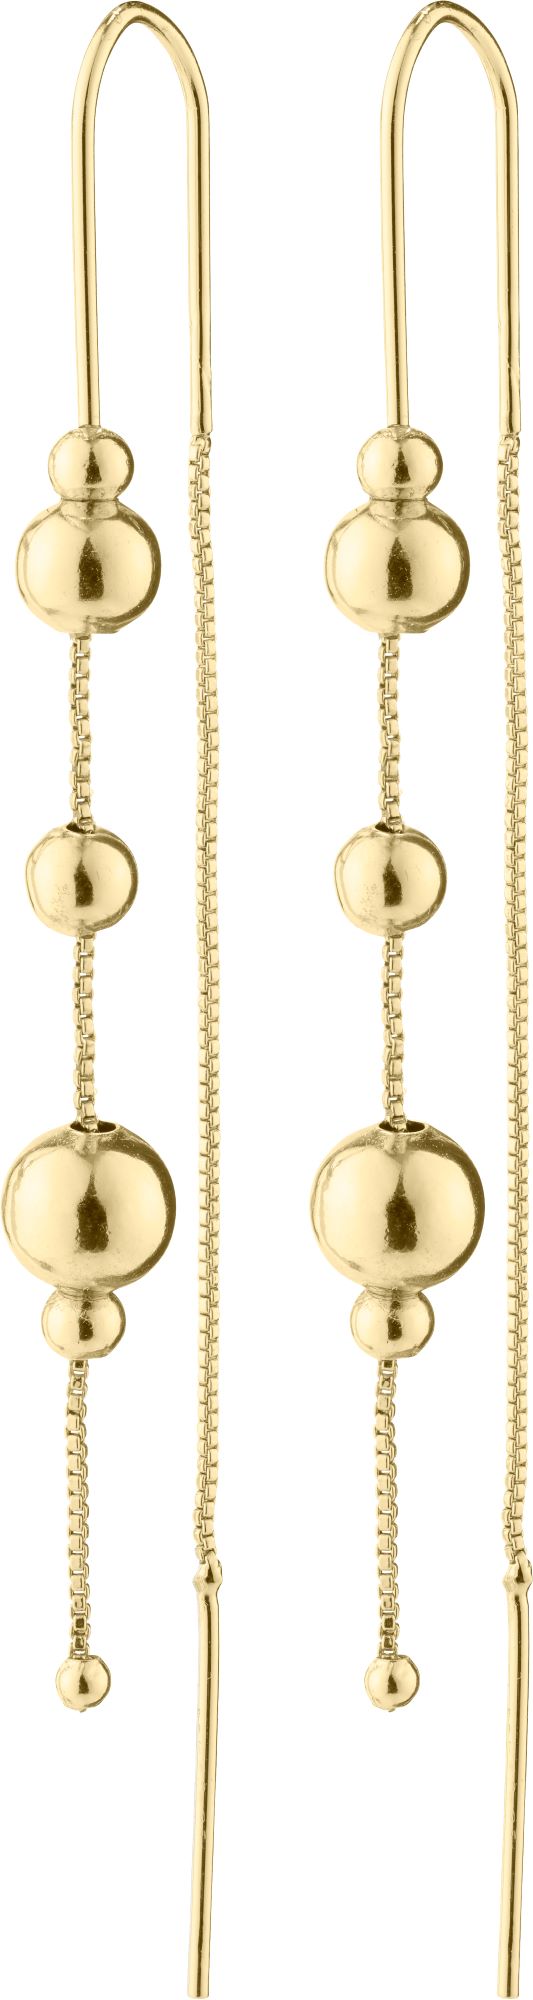 Chain Earrings Gold Plated